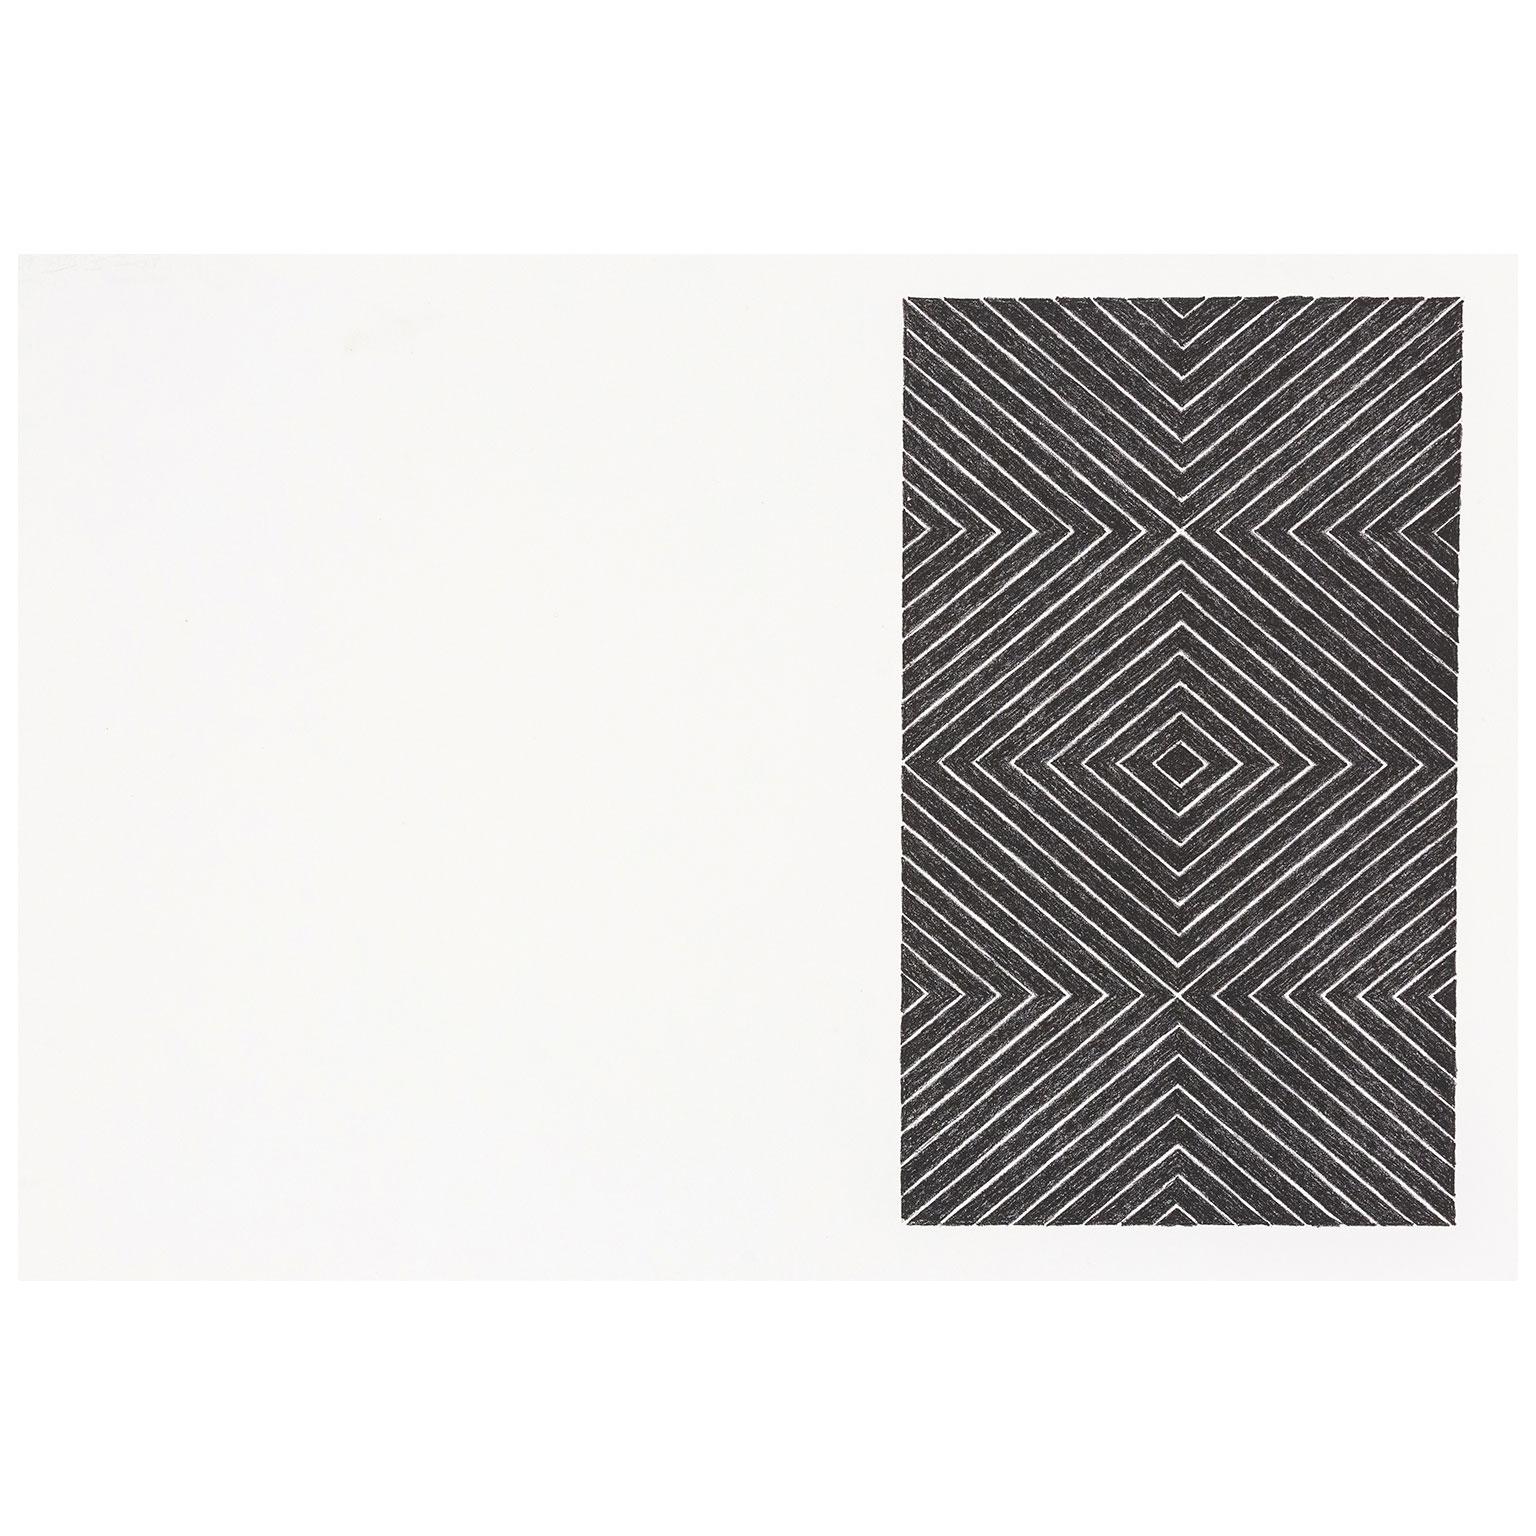 "Gezira" from Black Series II  USA, 1967, Lithograph - Print by Frank Stella